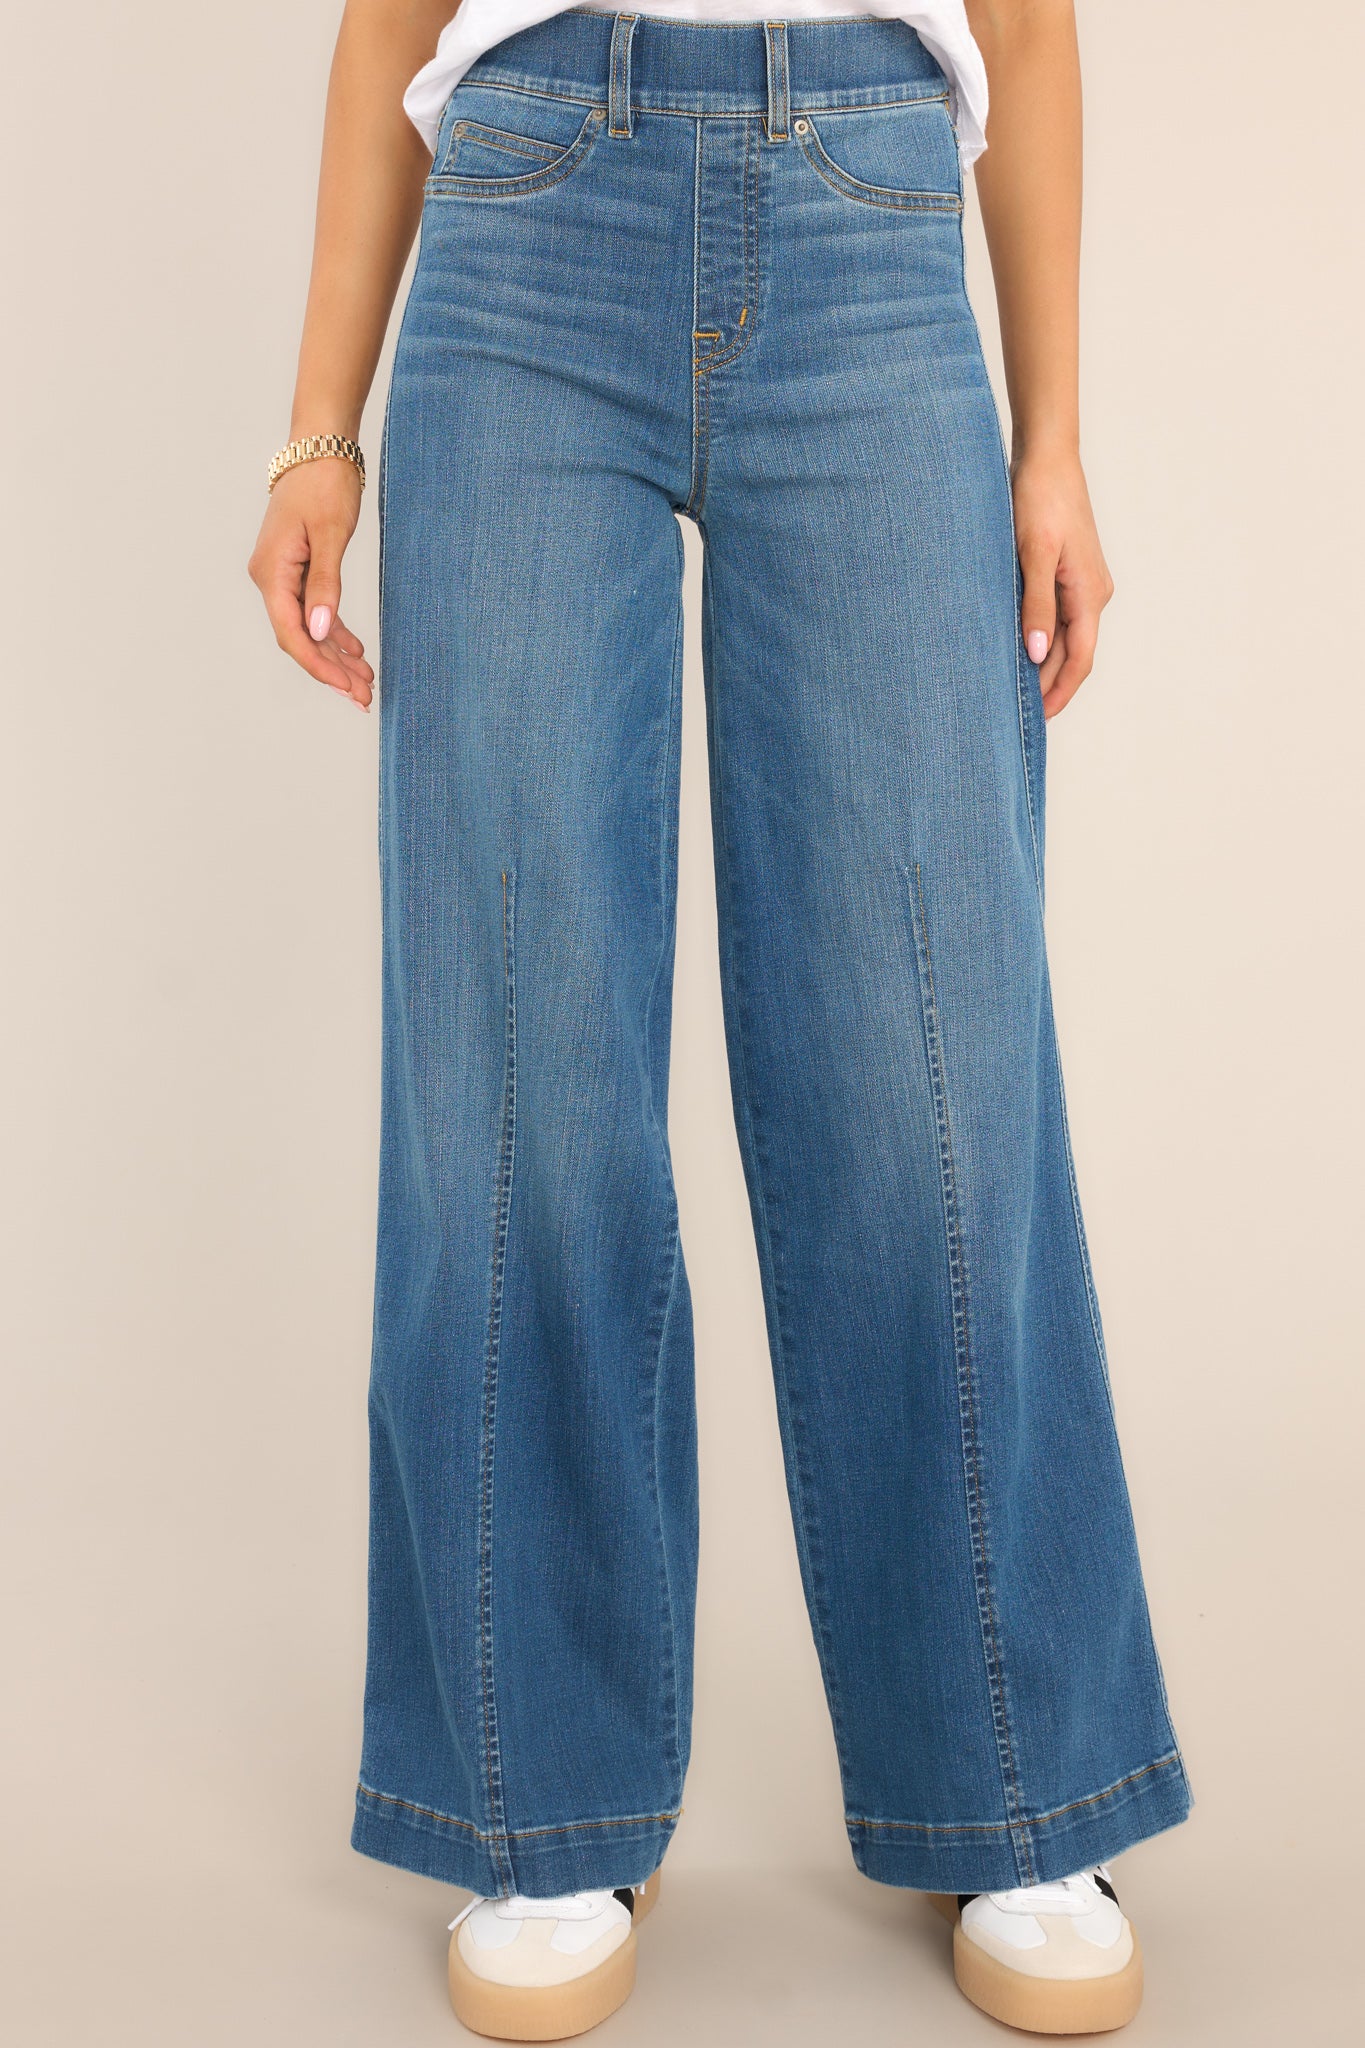 SPANX, Jeans, Spanx Seamed Front Wide Leg Jeans Vintage Indigo Small Nwt